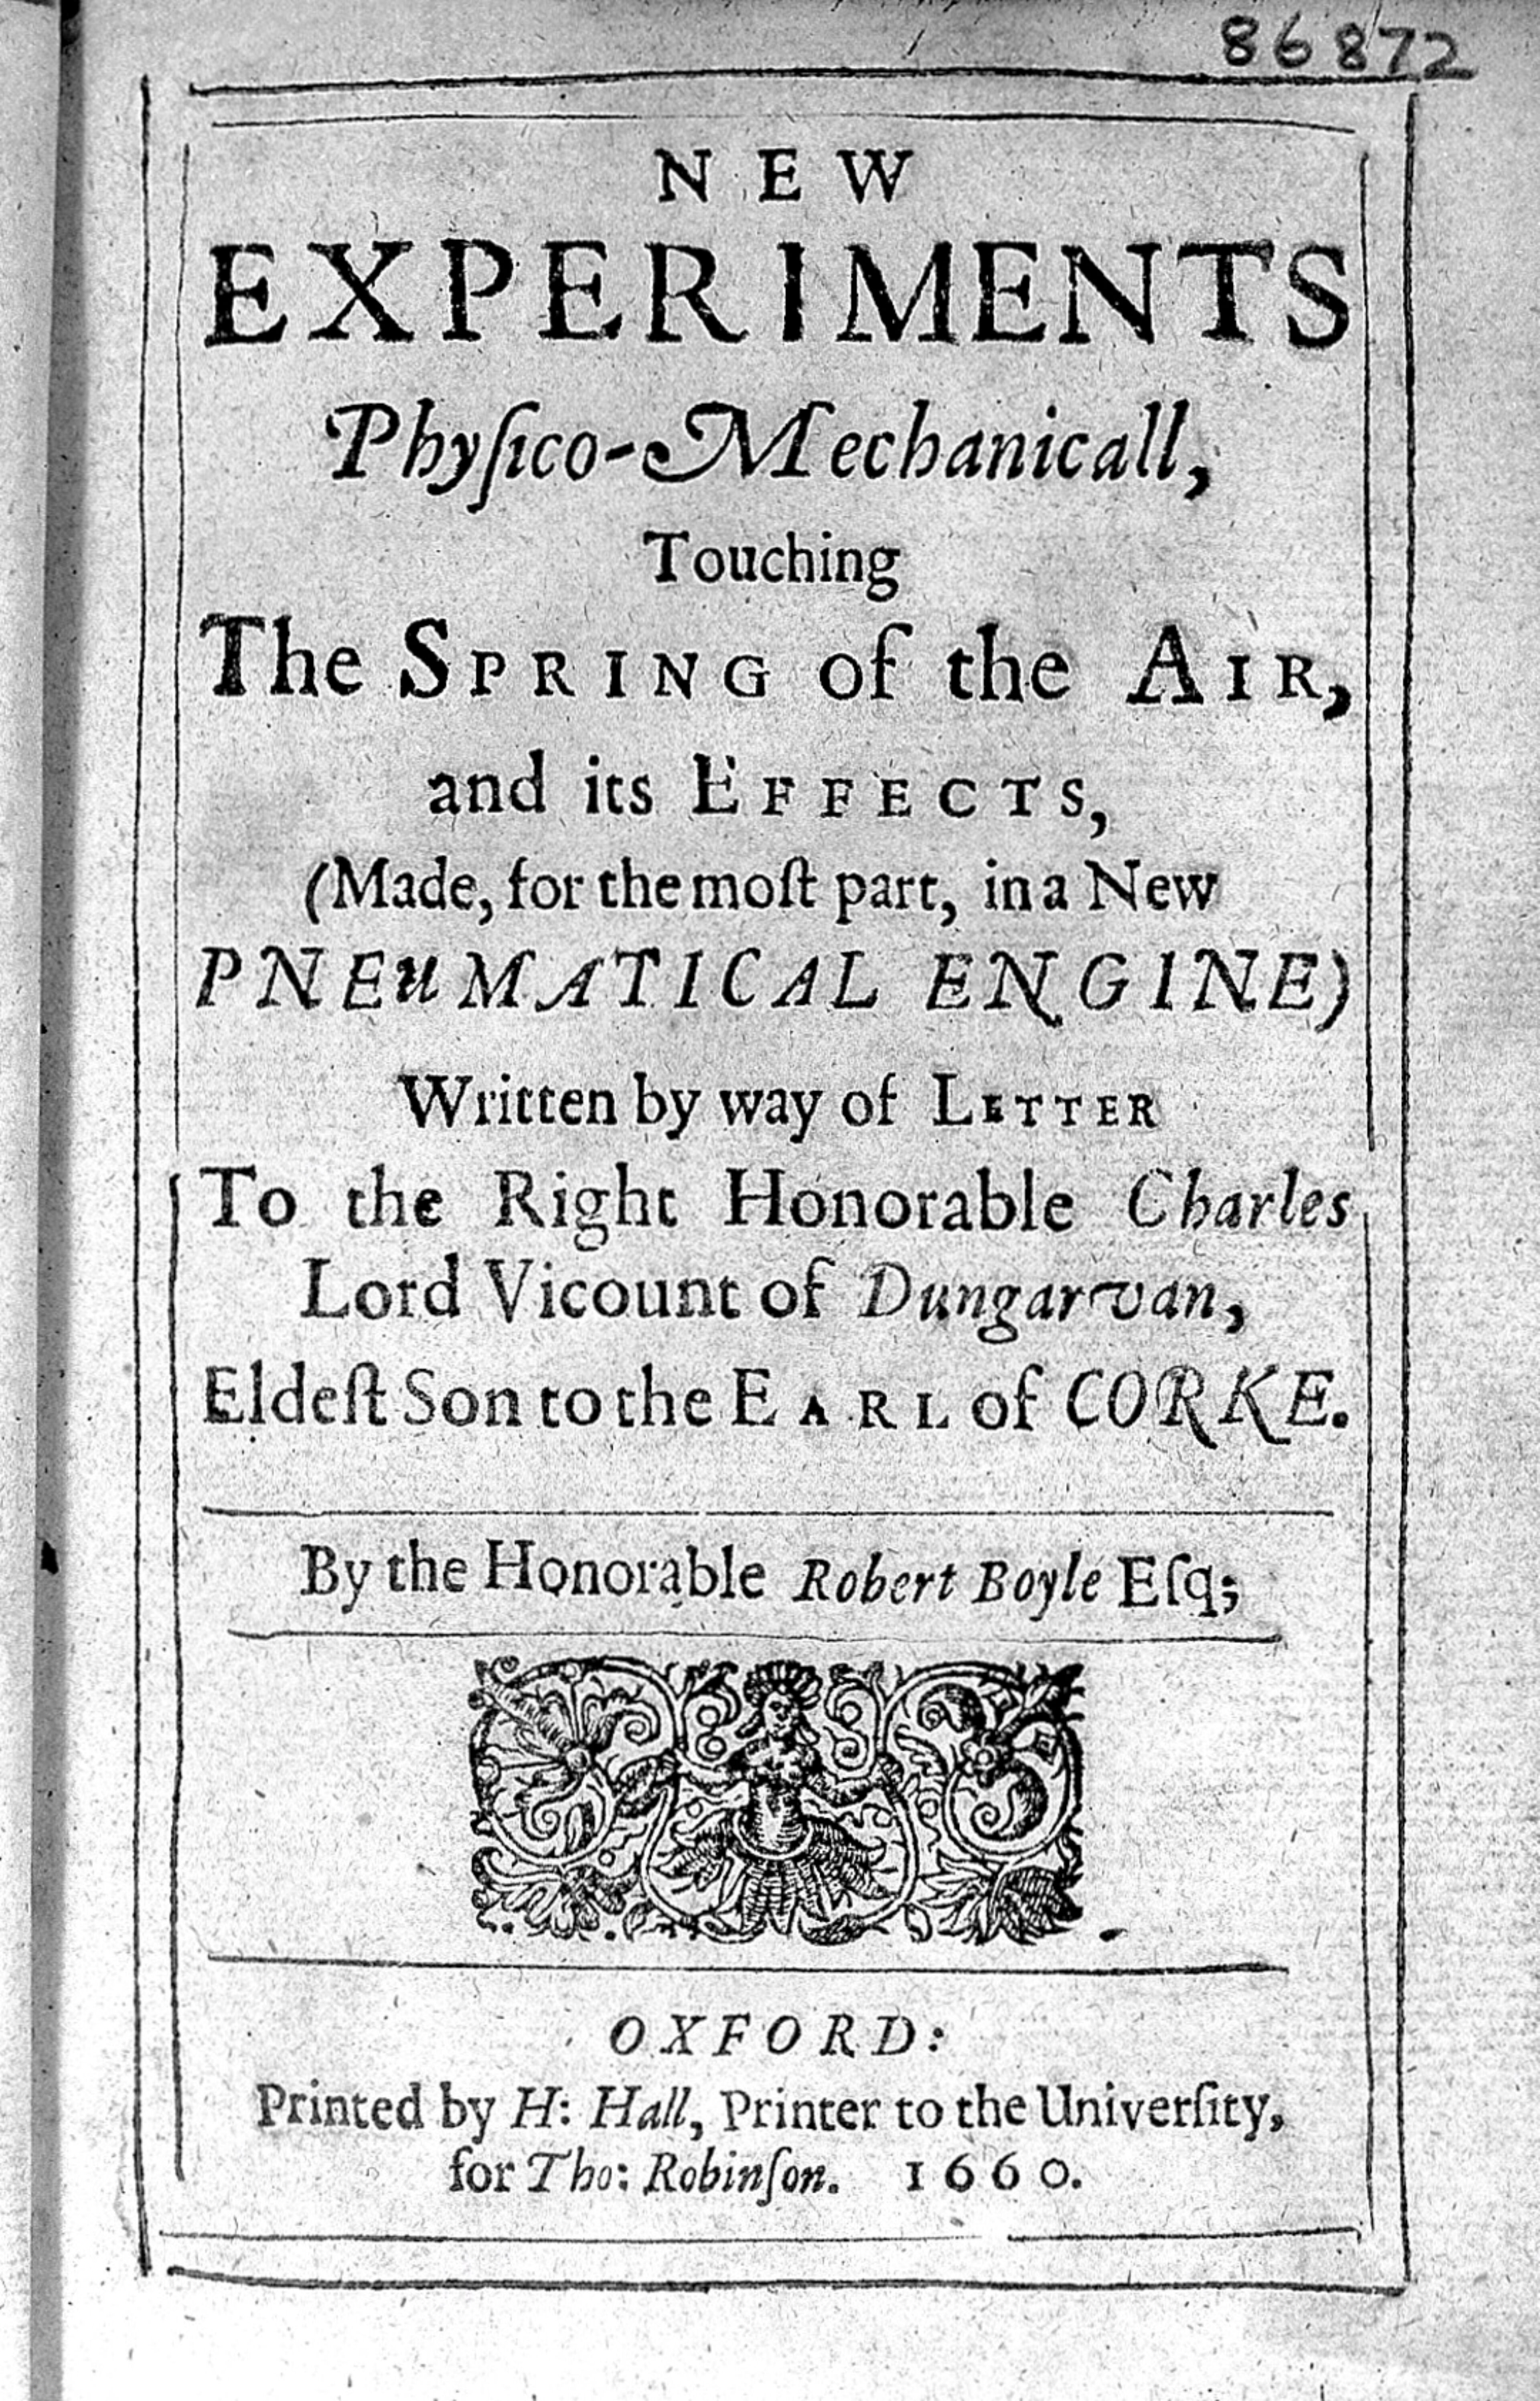 New experiments physico-mechanicall, touching the spring of the air, and its effects (made for the most part, in a new pneumatical engine) / Written by way of letter to ... Charles, Lord Vicount of Dungarvan ... by the Honorable Robert Boyle.